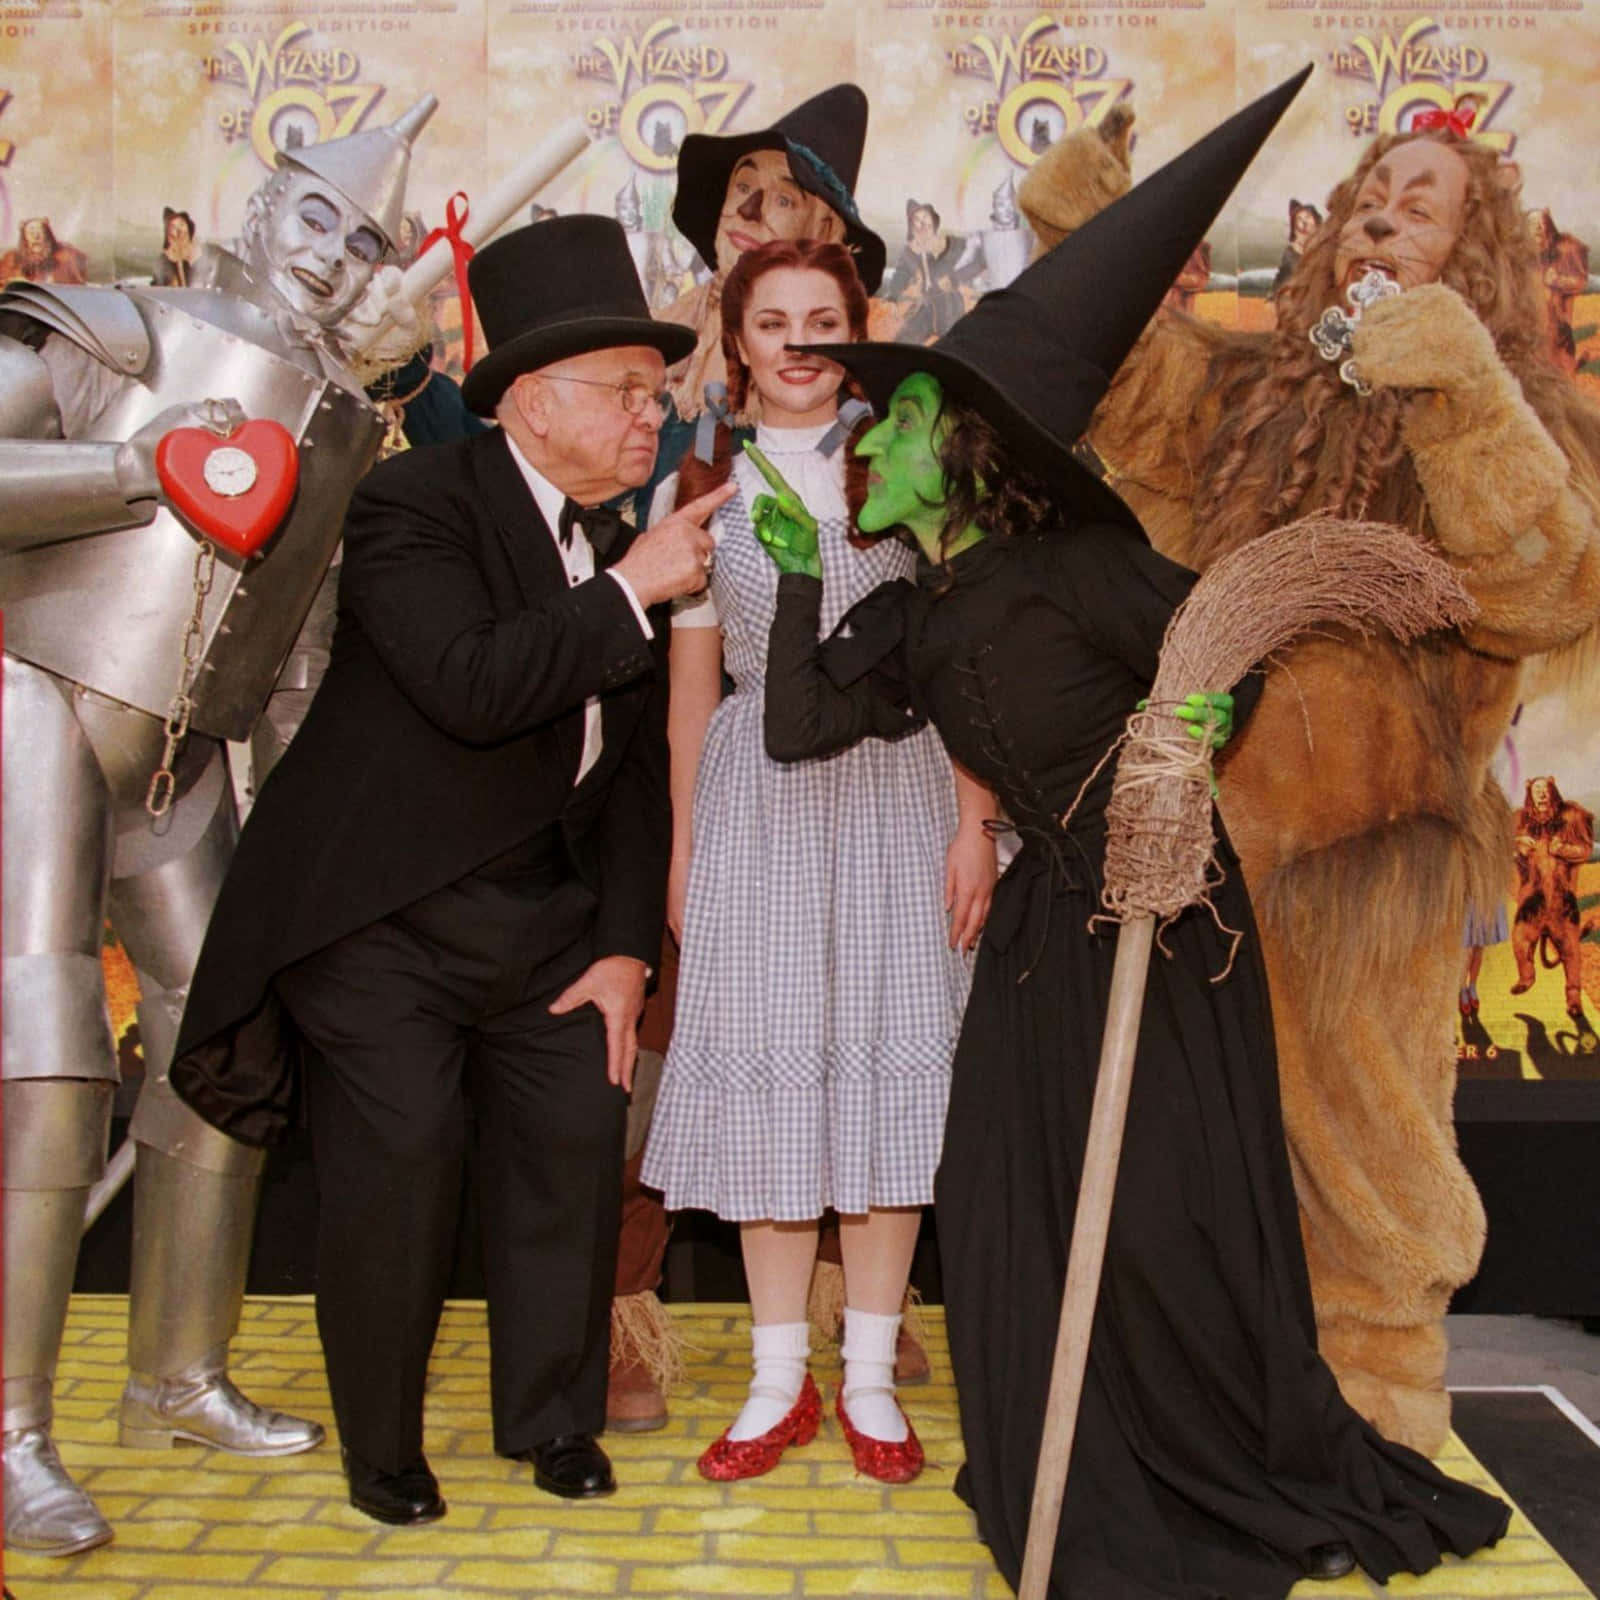 Follow the Yellow Brick Road to visit the Land of Oz!